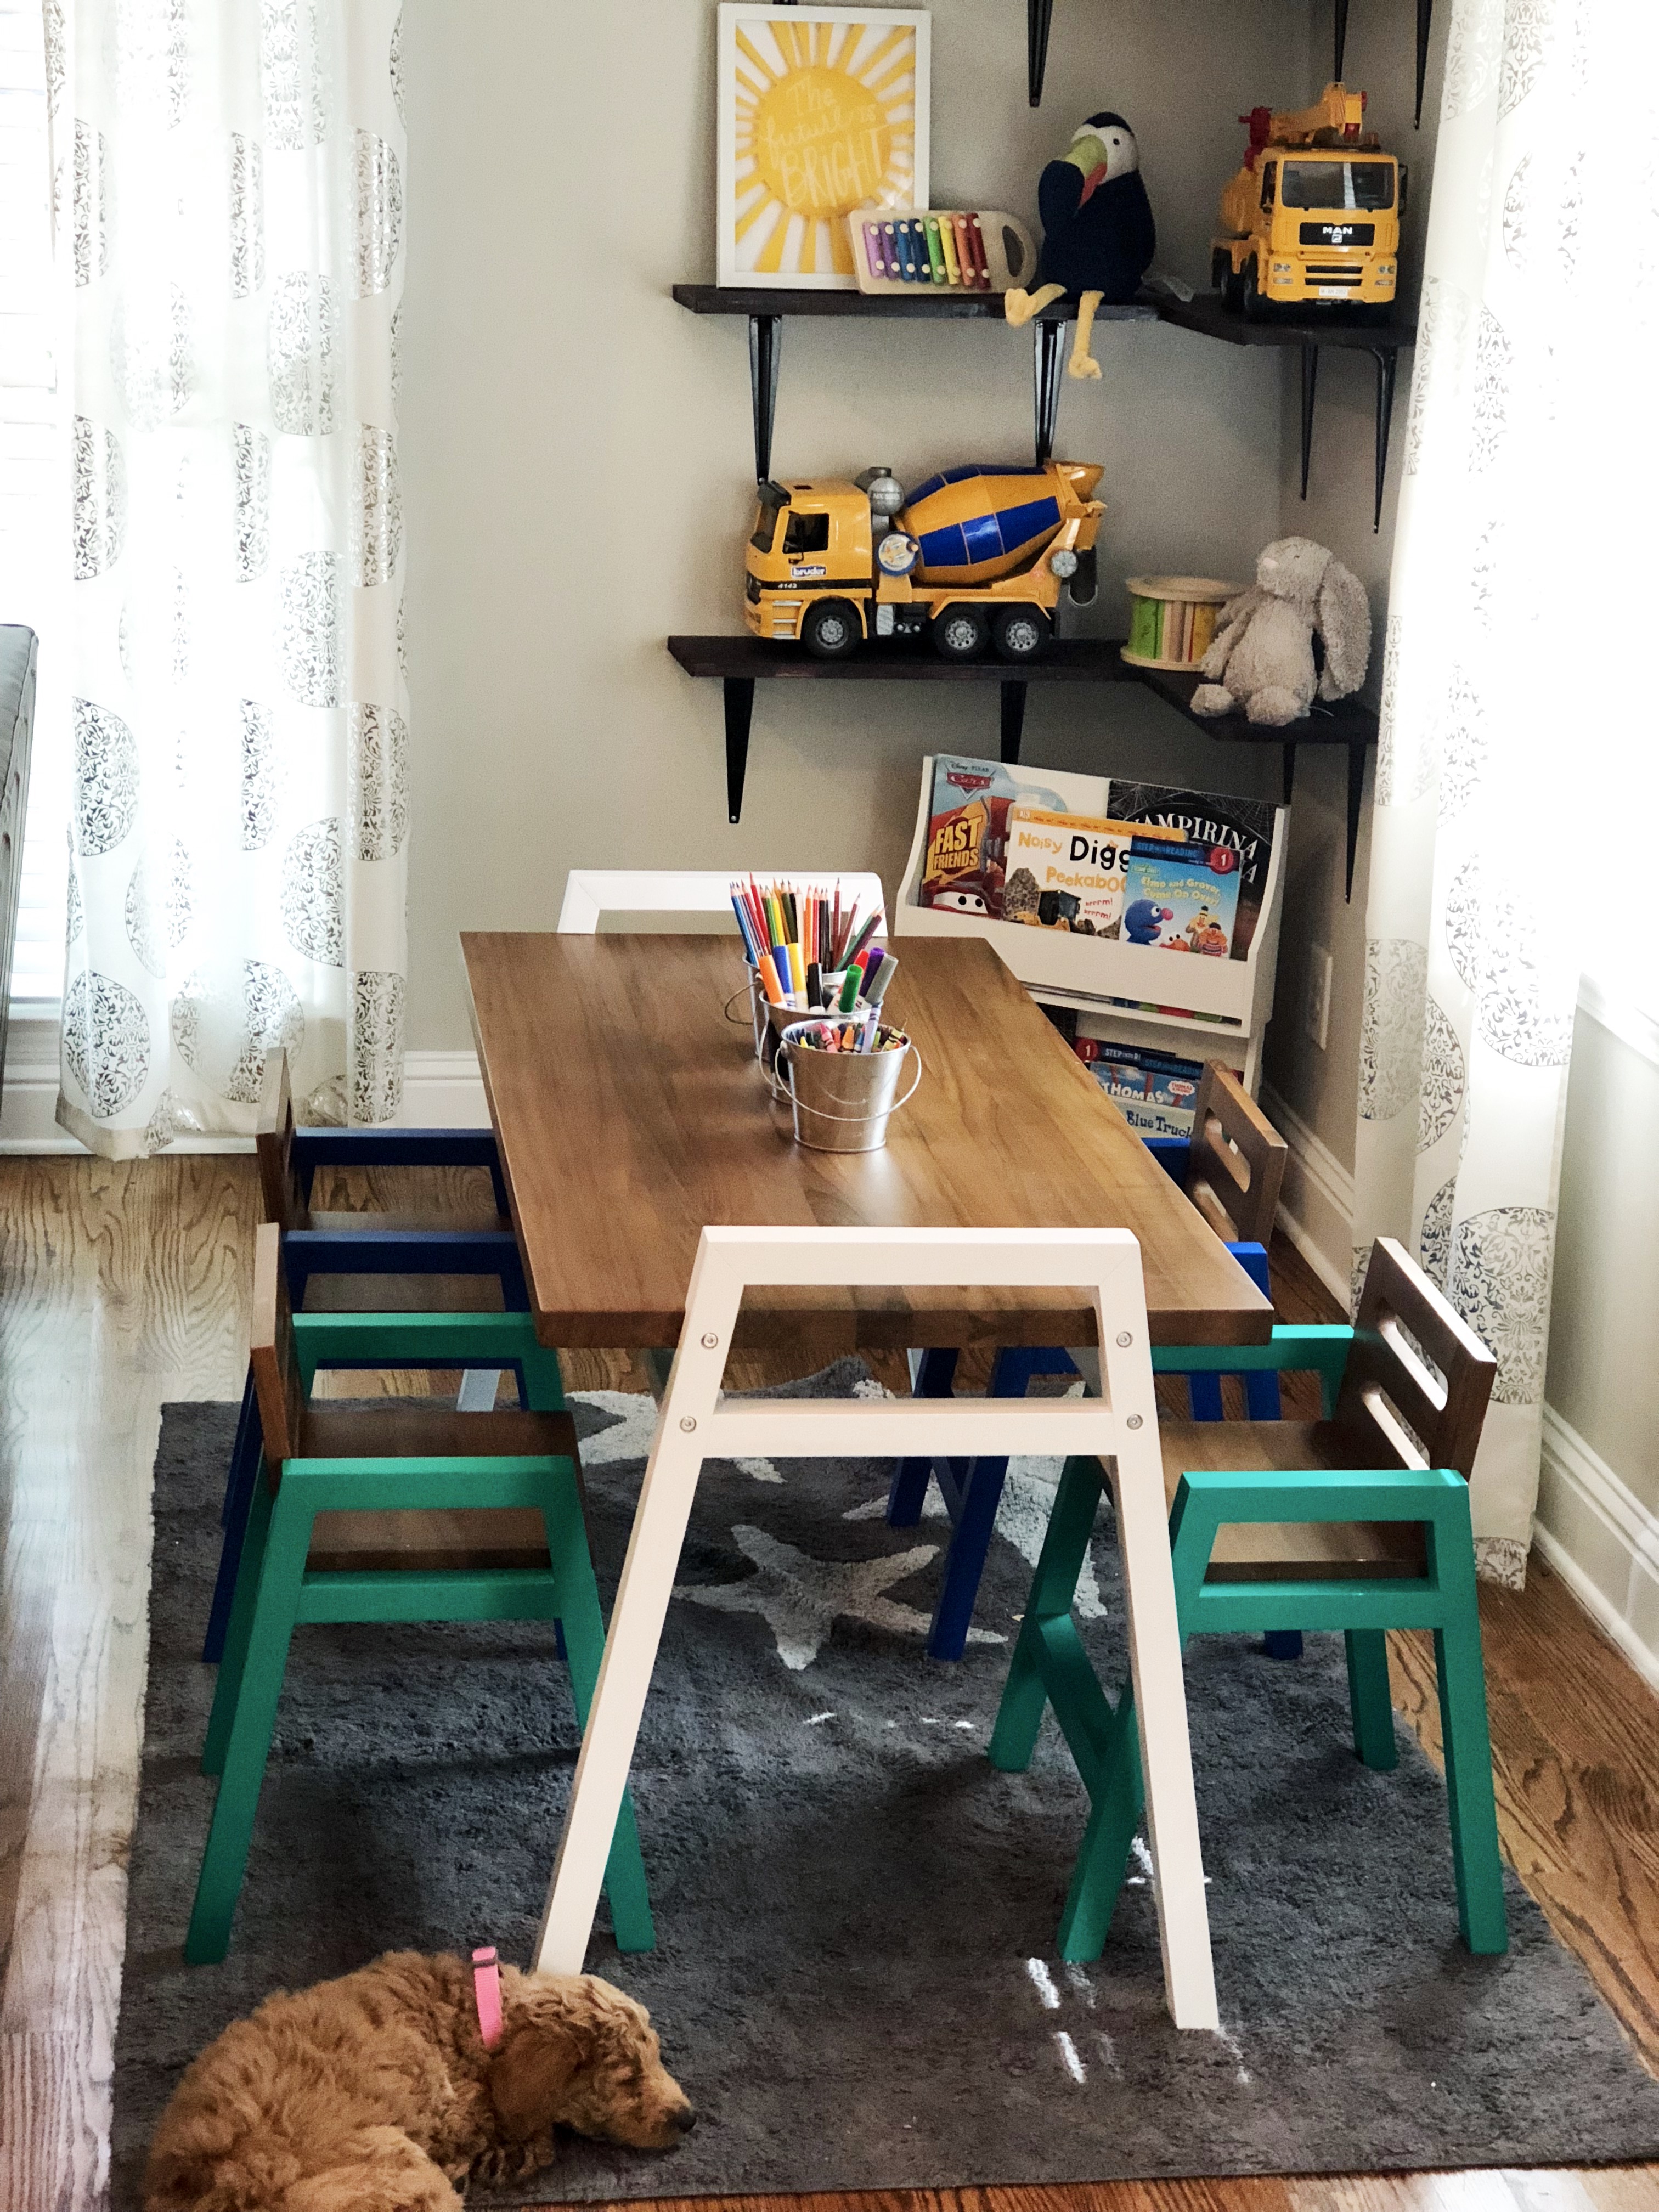 kids nook land of nod - Home Renovations We're Working on Now by Atlanta lifestyle blogger Happily Hughes